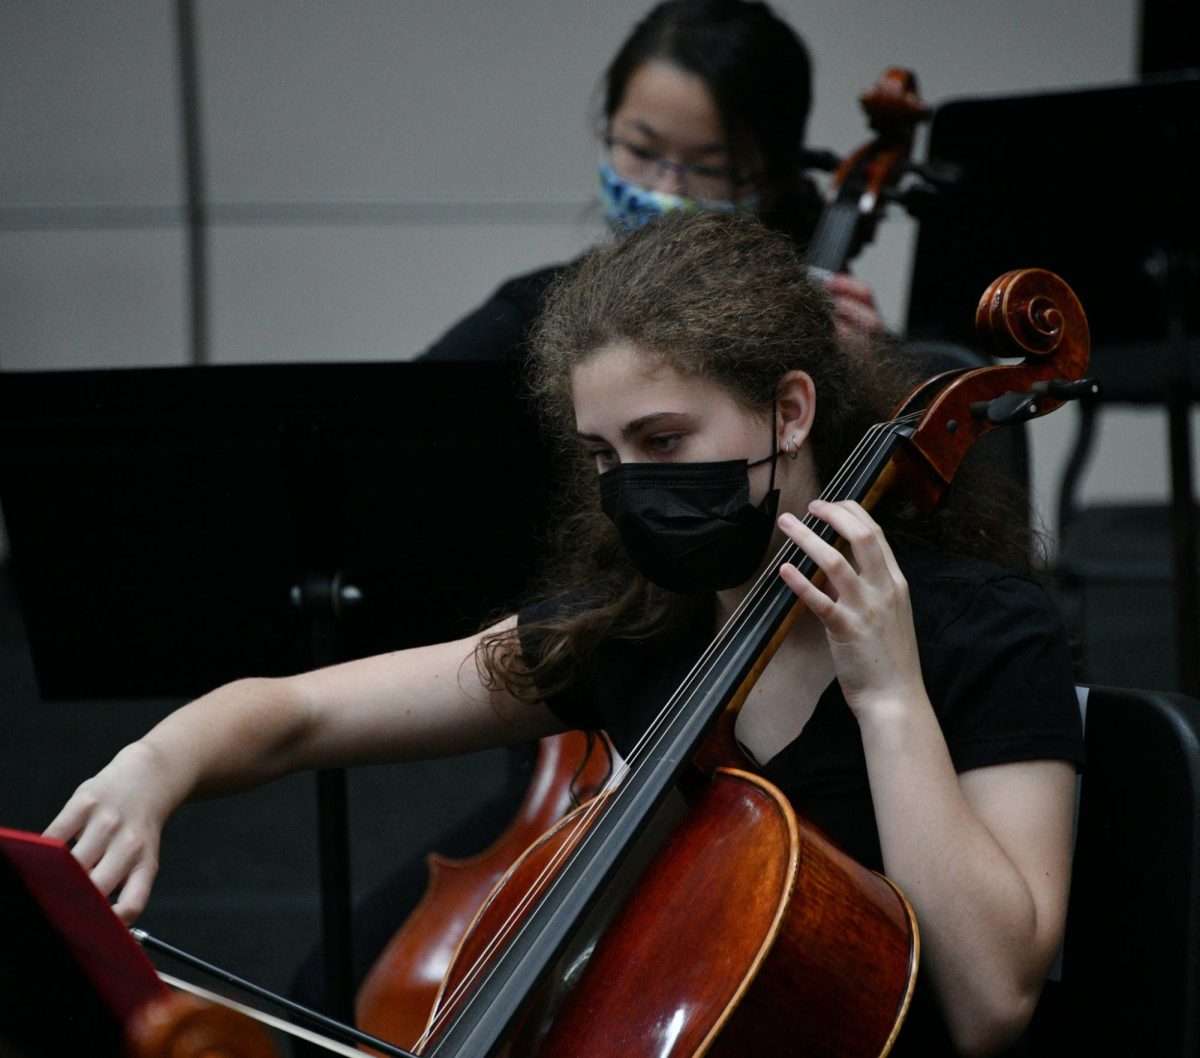 Orchestra: Behind the Scenes